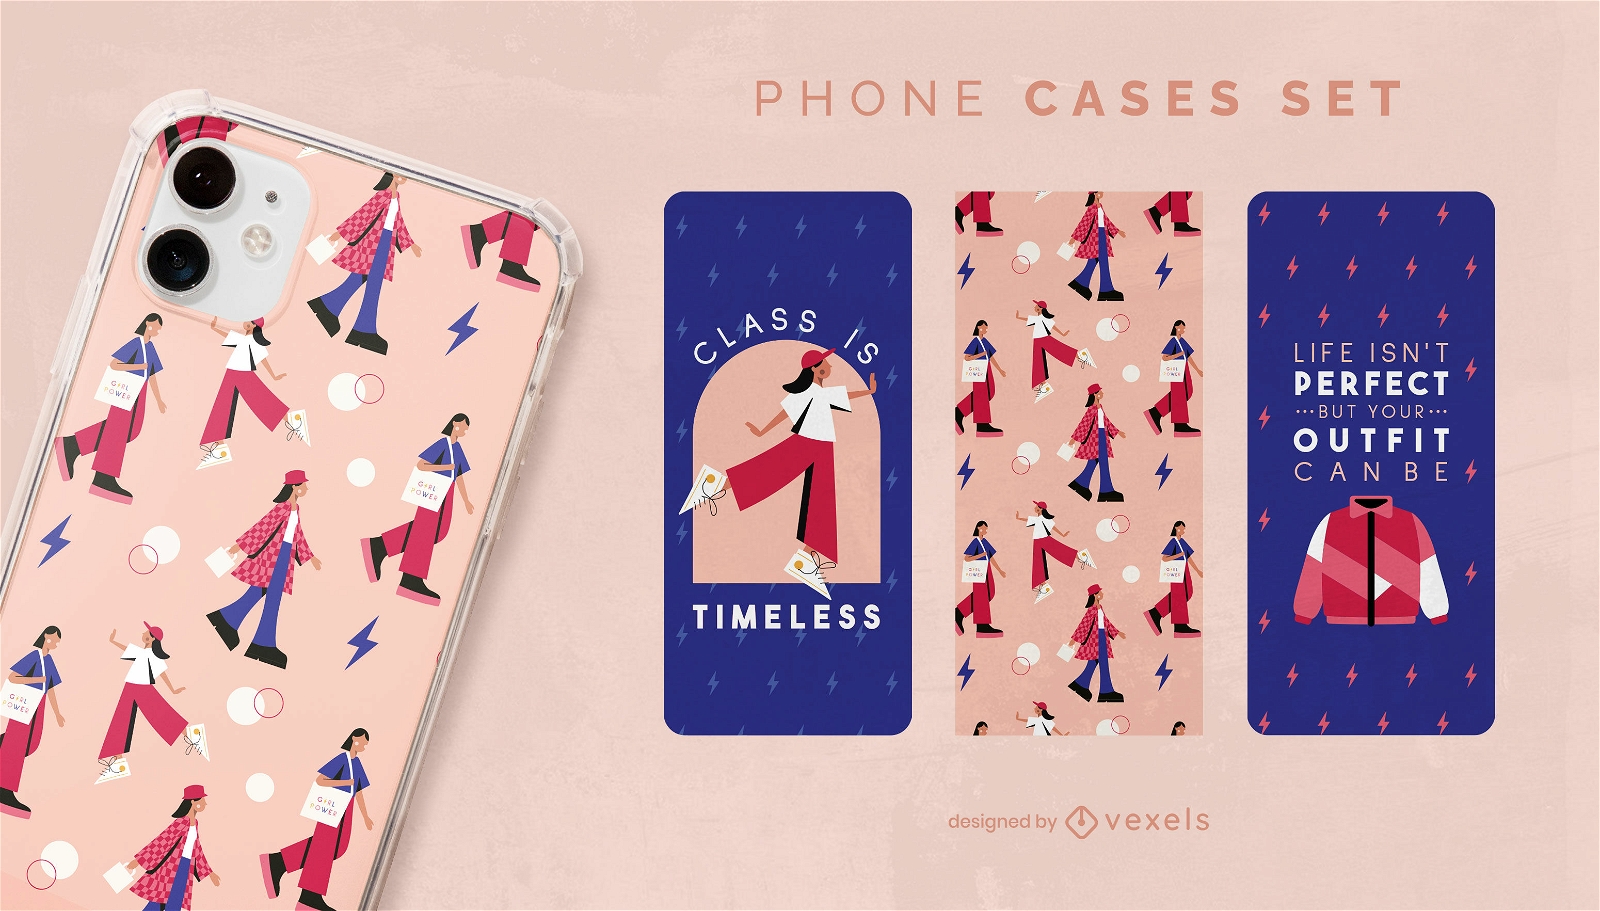 Timeless class fashion phone cases set